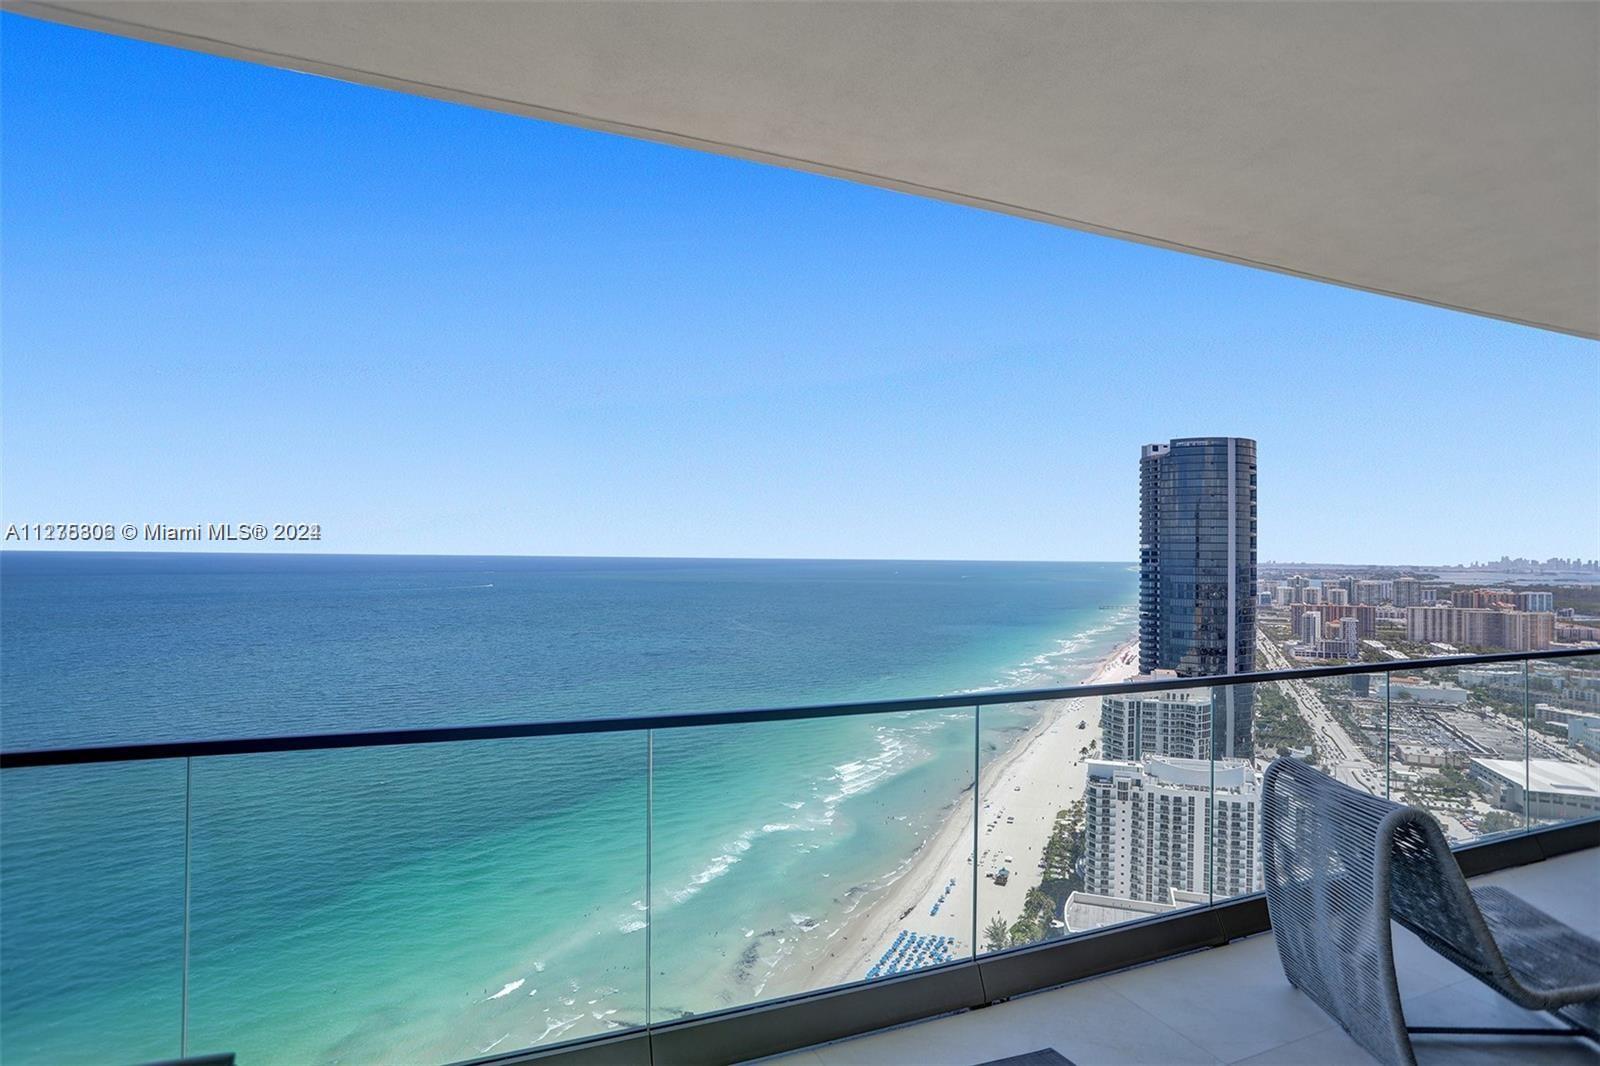 Welcome to Paradise, Best Turnkey design finishes in the one and only “Armani Tower, Stunning flowthru unit  with breathtaking Ocean, City & Intracoastal Views. Unit features a private elevator that takes you to your 4 BDRM 5.5 BTH + staff quarters, With 3176 sq ft.  2 oversized terraces of 1000 sq ft, total 4176 of space with a Summer Kitchen on the ocean side. Italian designed kitchen with sleek edges, imported stone countertops ,24x 48 Marble throughout custom closets & electric window treatments, Master Bathroom features stone throughout & spa shower. Armani Residences, is  flawless in design, by Giorgio Armani, top notch amenities include  theatre, game room, gym, Full at the spa, salon, restaurant, lounge. Full concierge and beach service.